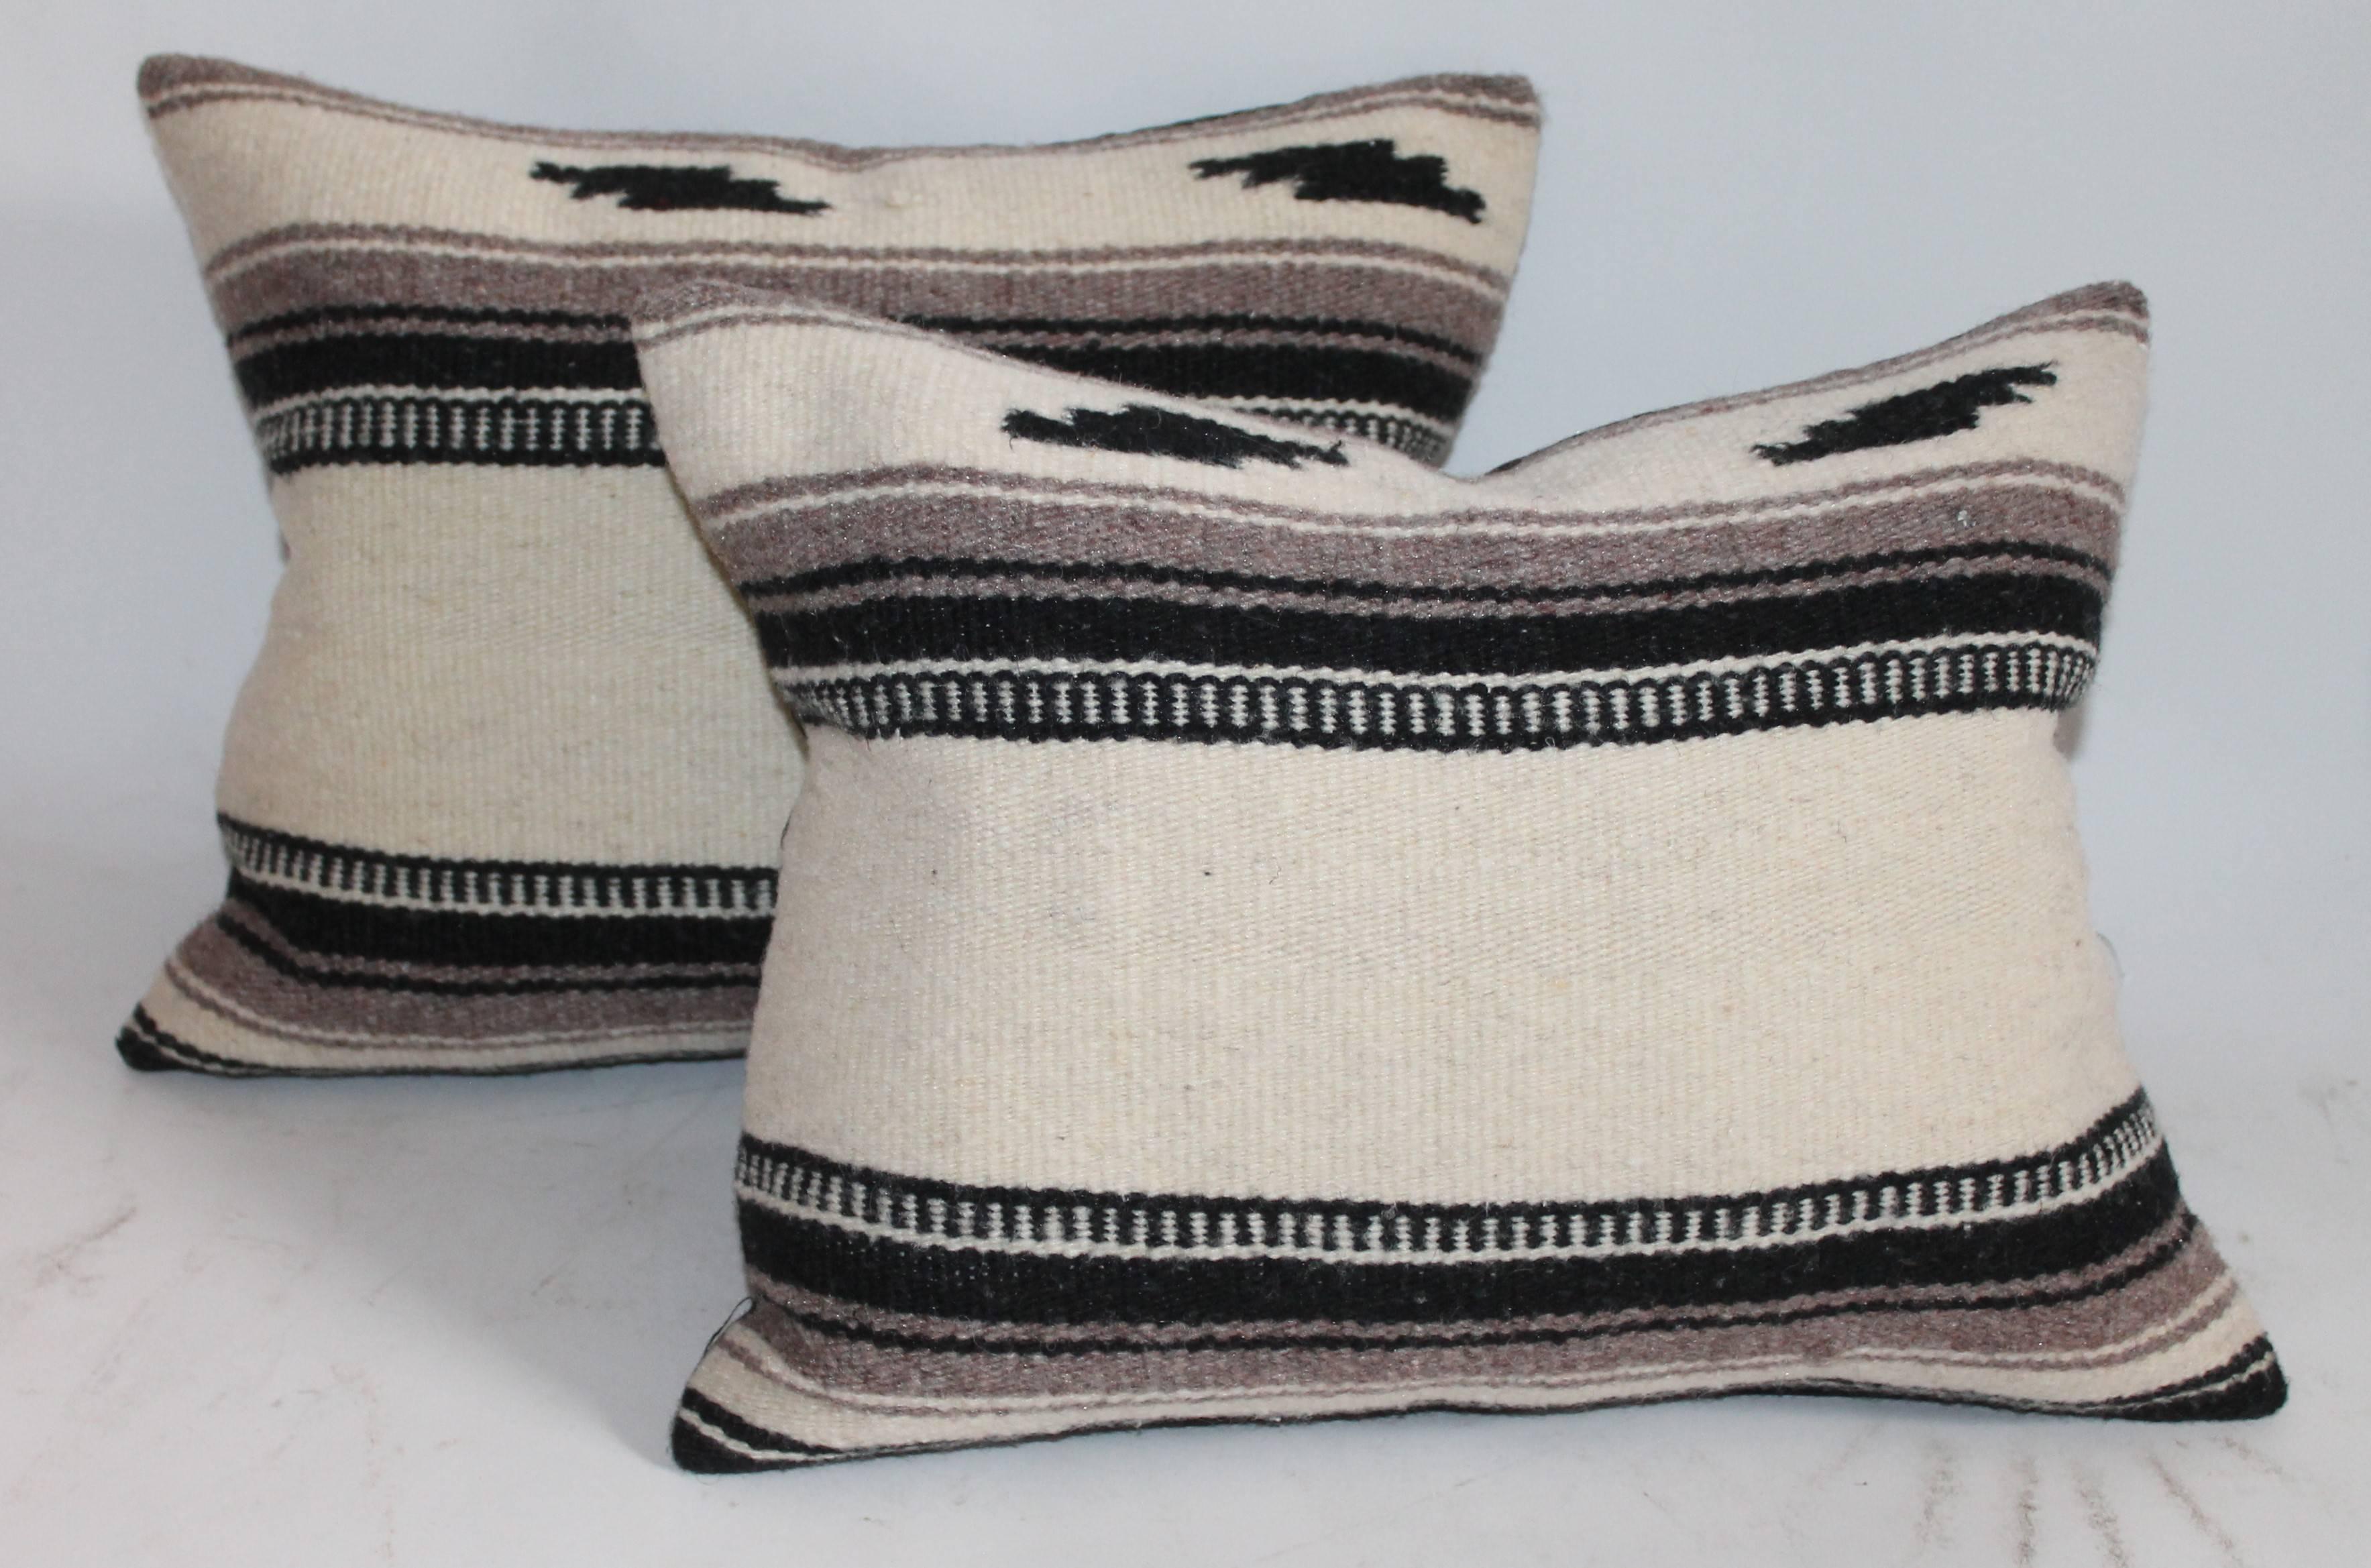 20th Century Woven Wool Horse Blanket Pillows or Collection of Three